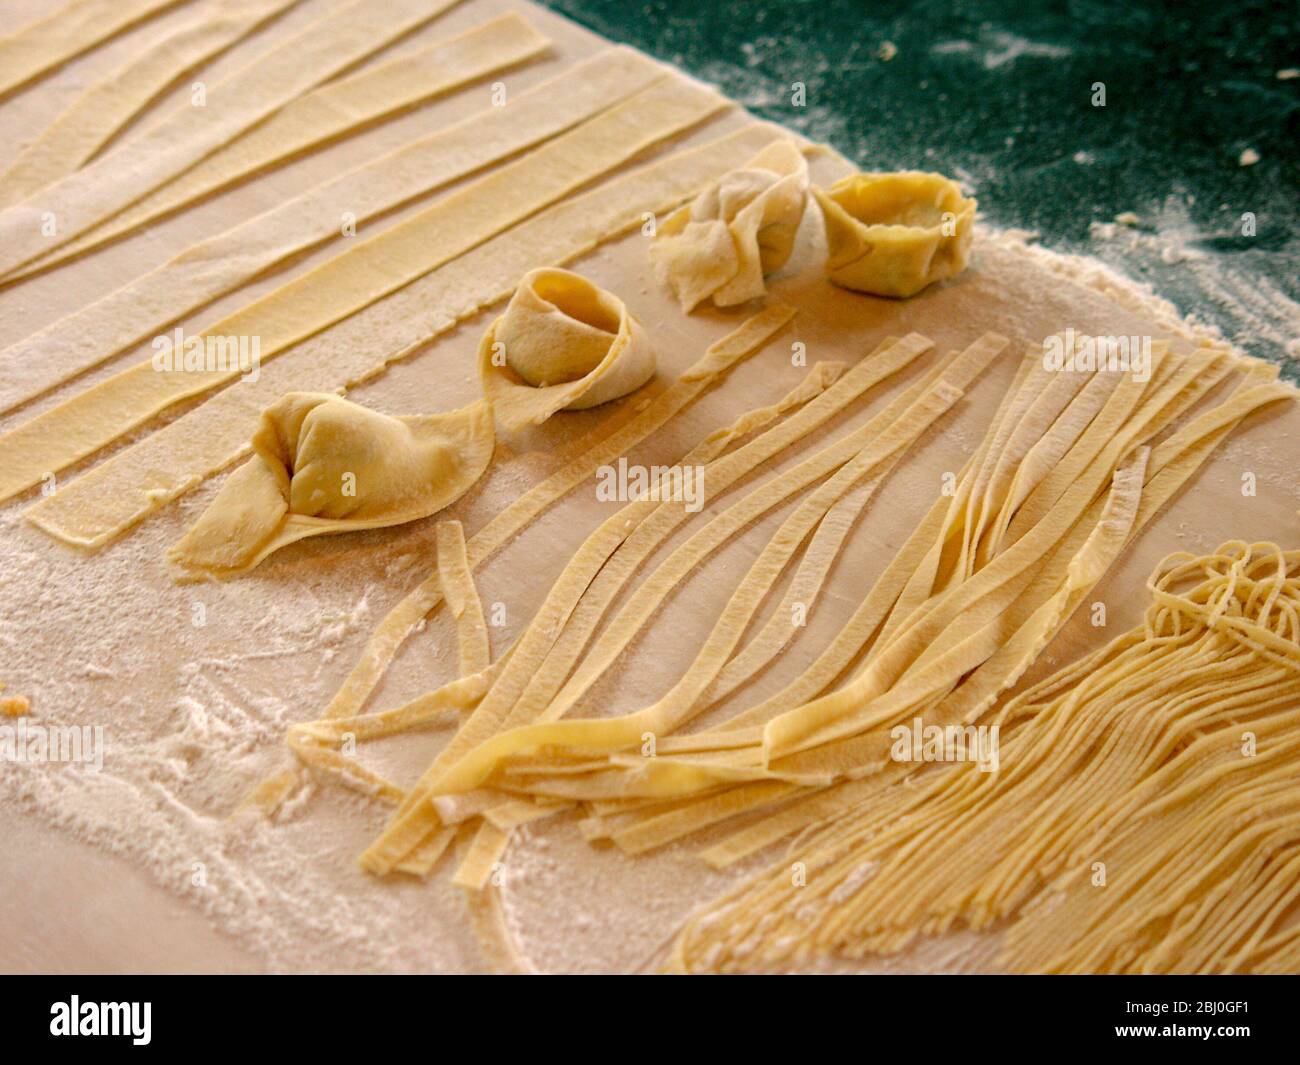 Examples of different shapes of pasta made from rolled out sheets. - Stock Photo